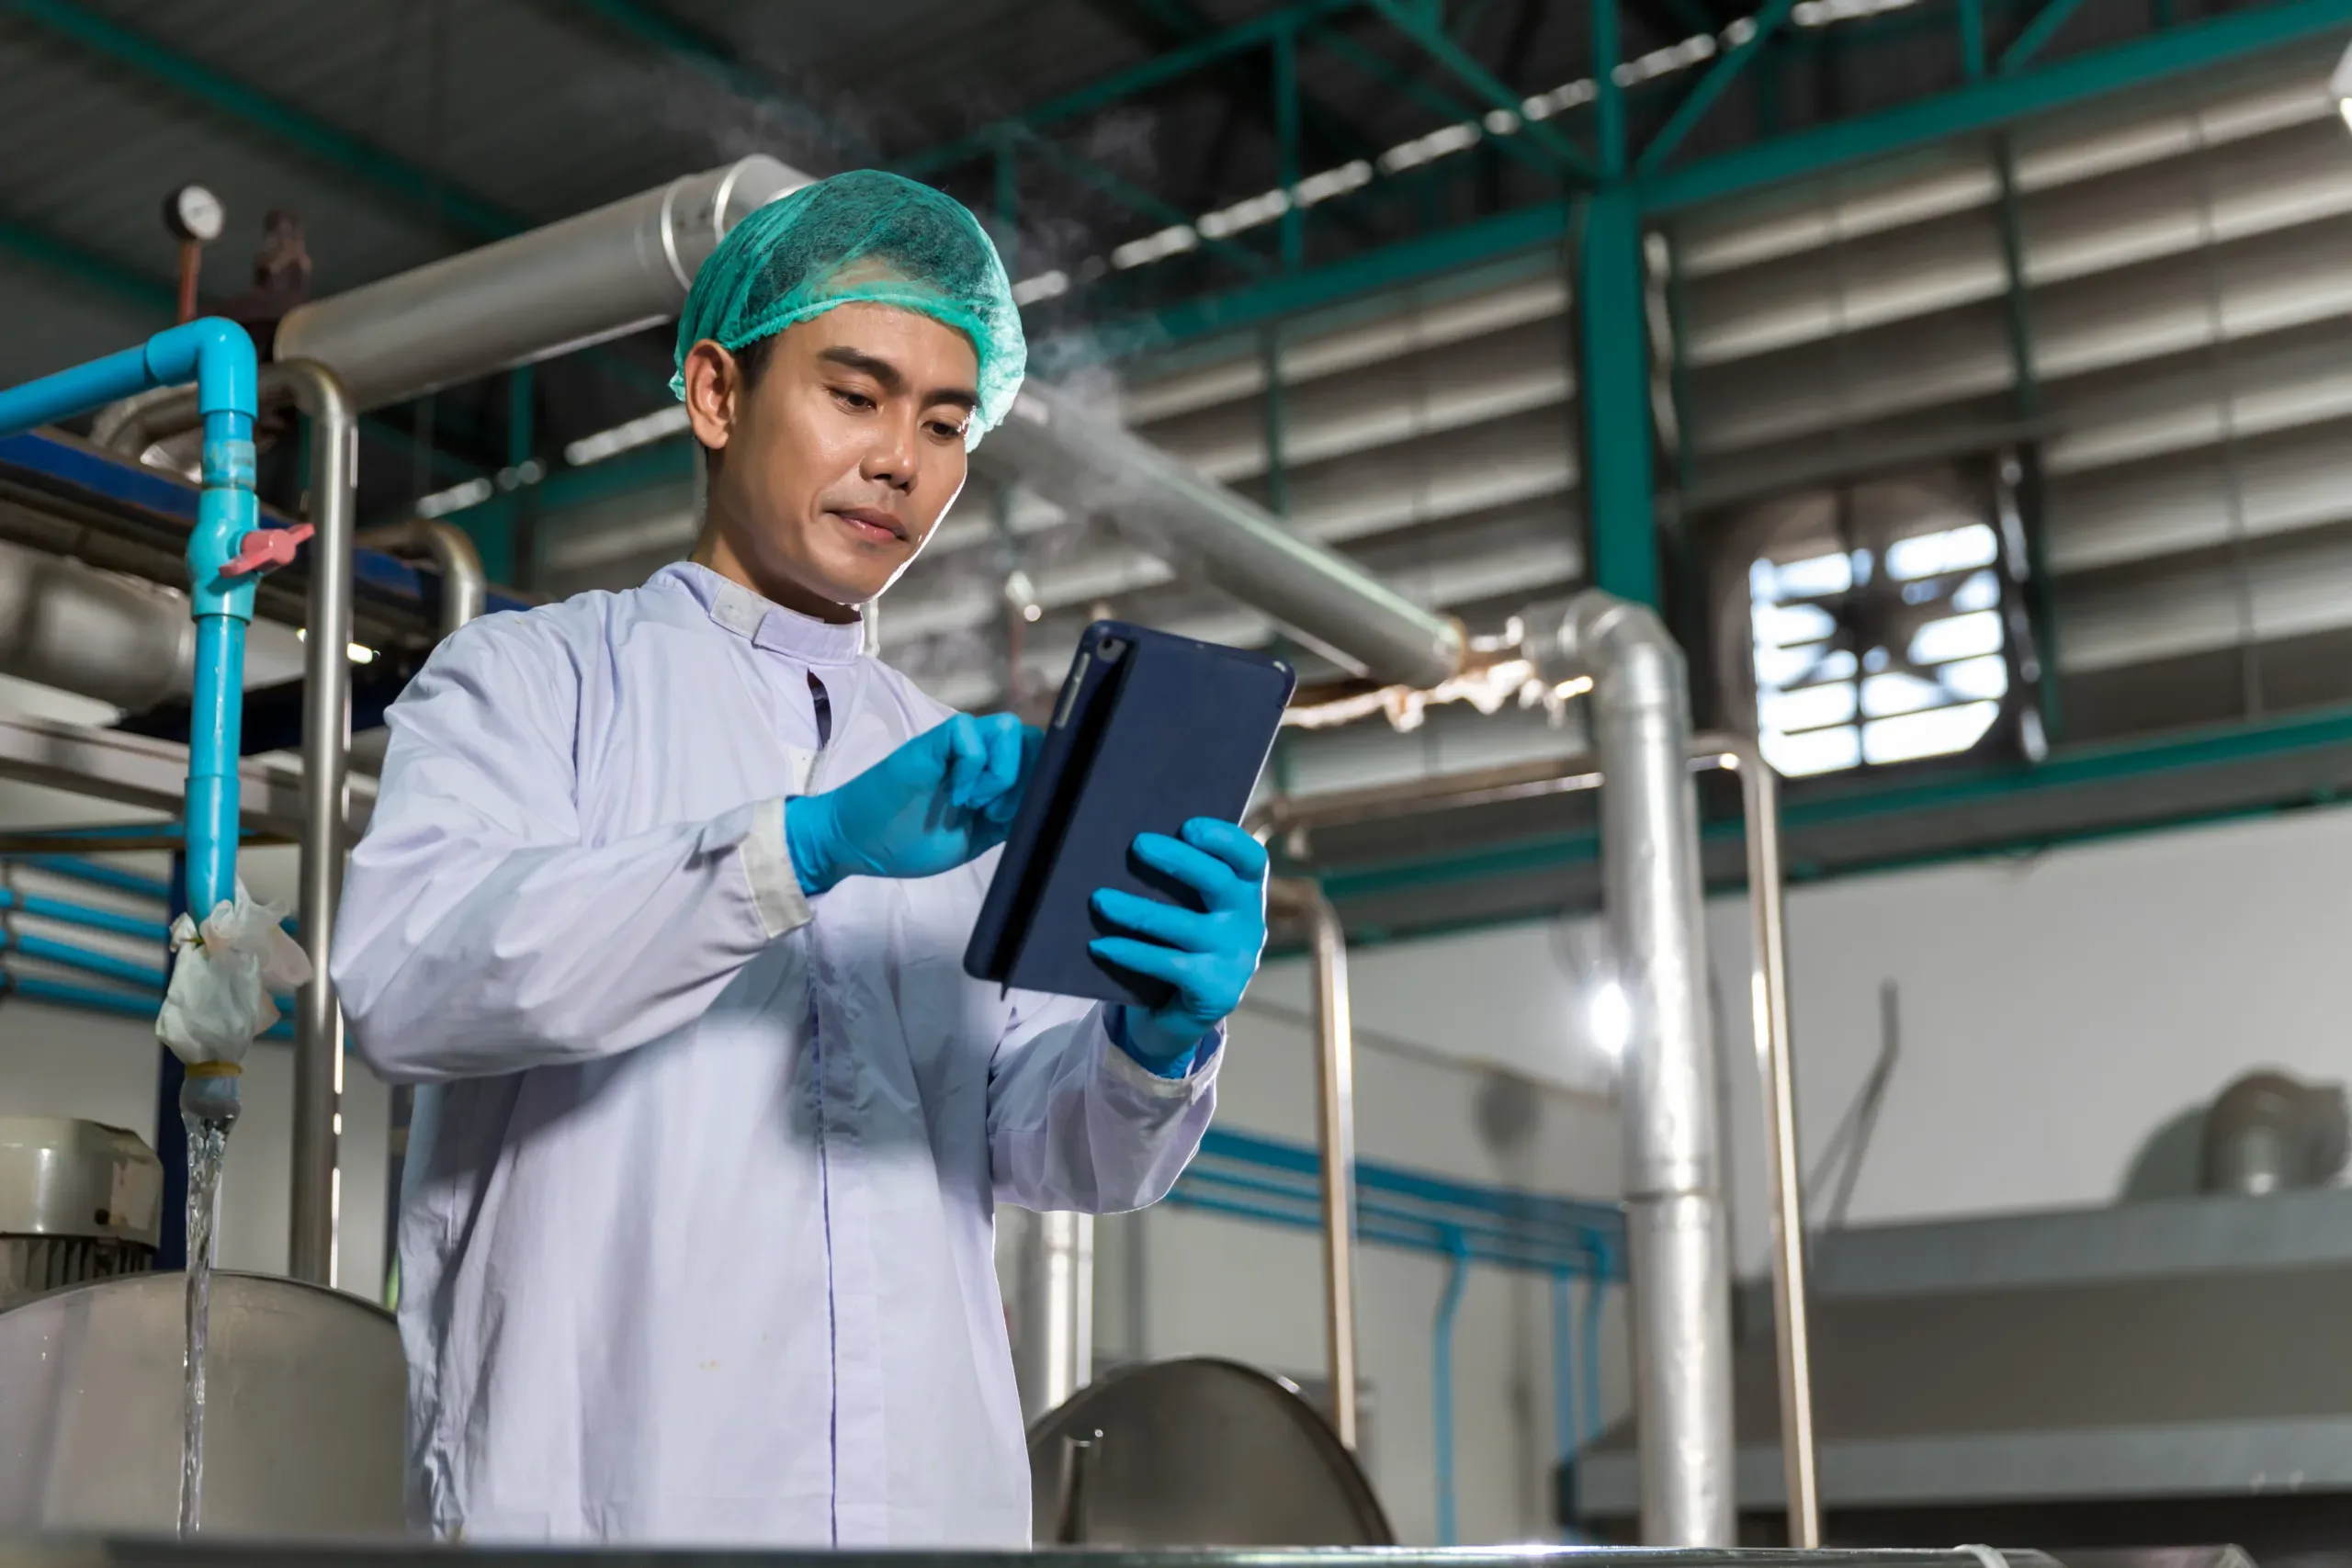 Worker in a manufacturing environment, analyzing efficiency data on a tablet.